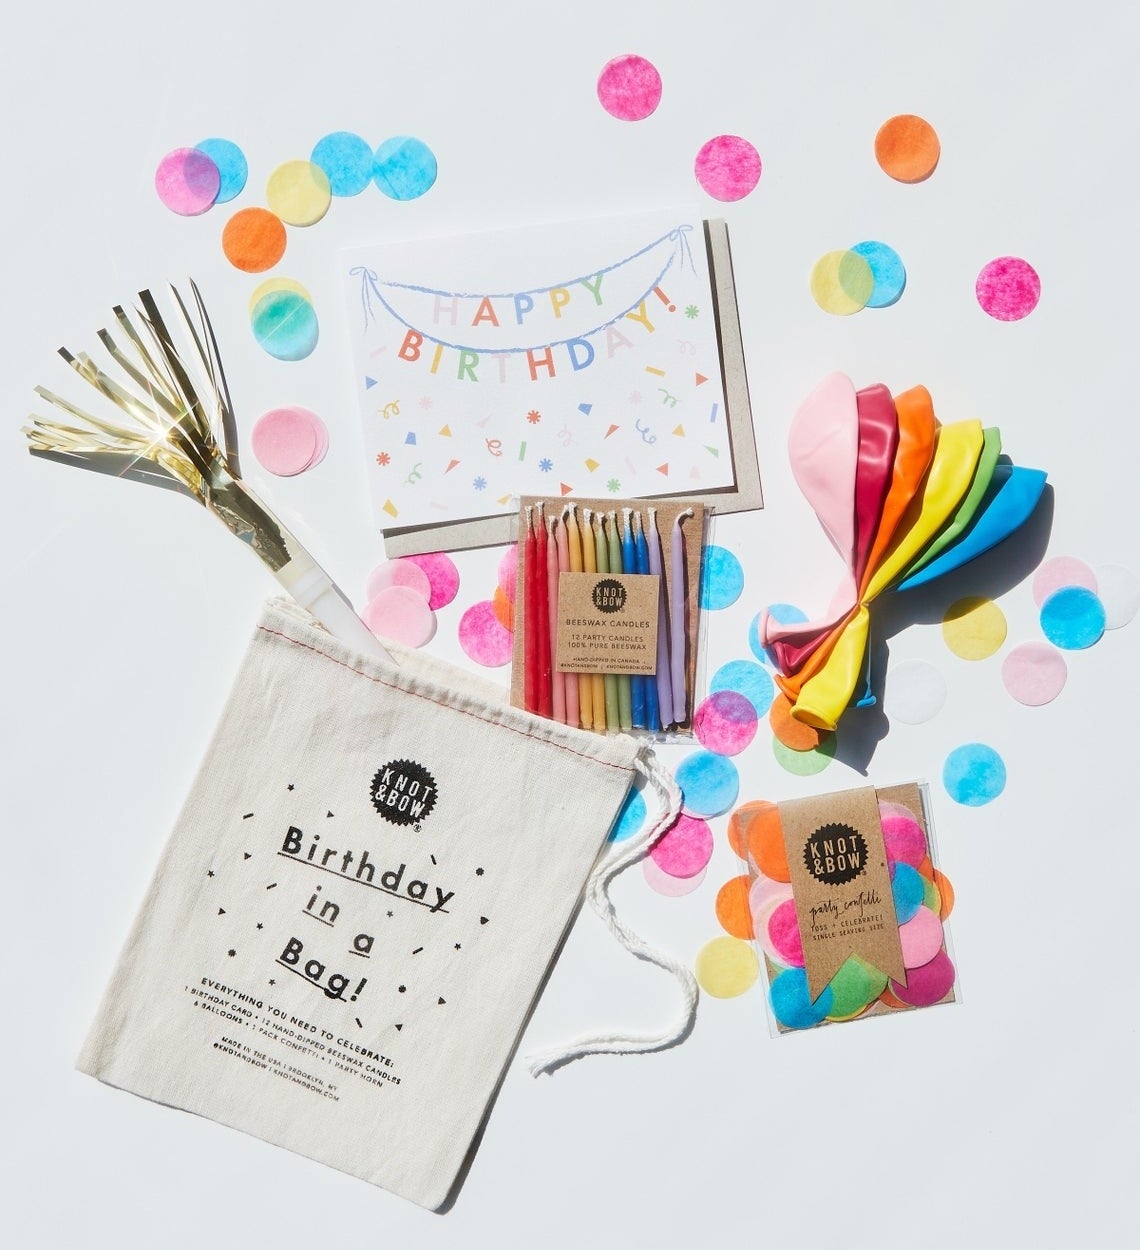 The various items that come with the birthday in a bag including the candles, balloons, card, confetti, and the bag